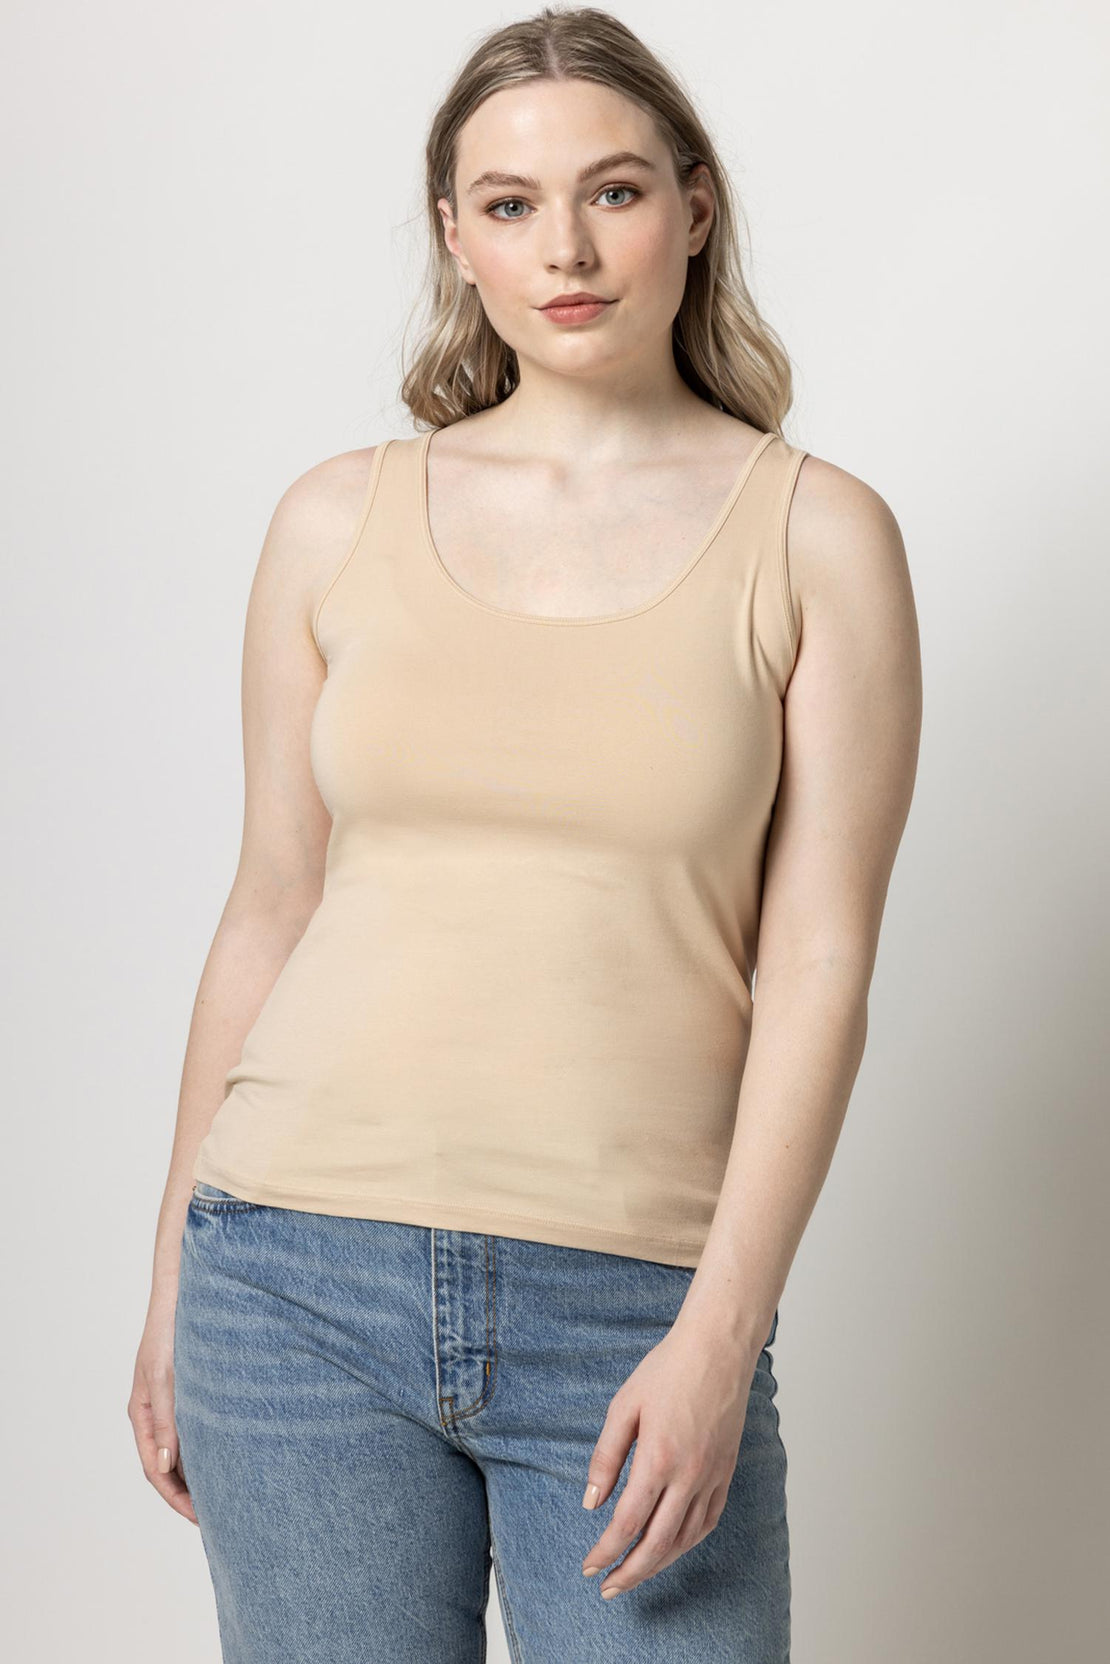 Scoop Layering Tank in nude by Lilla P